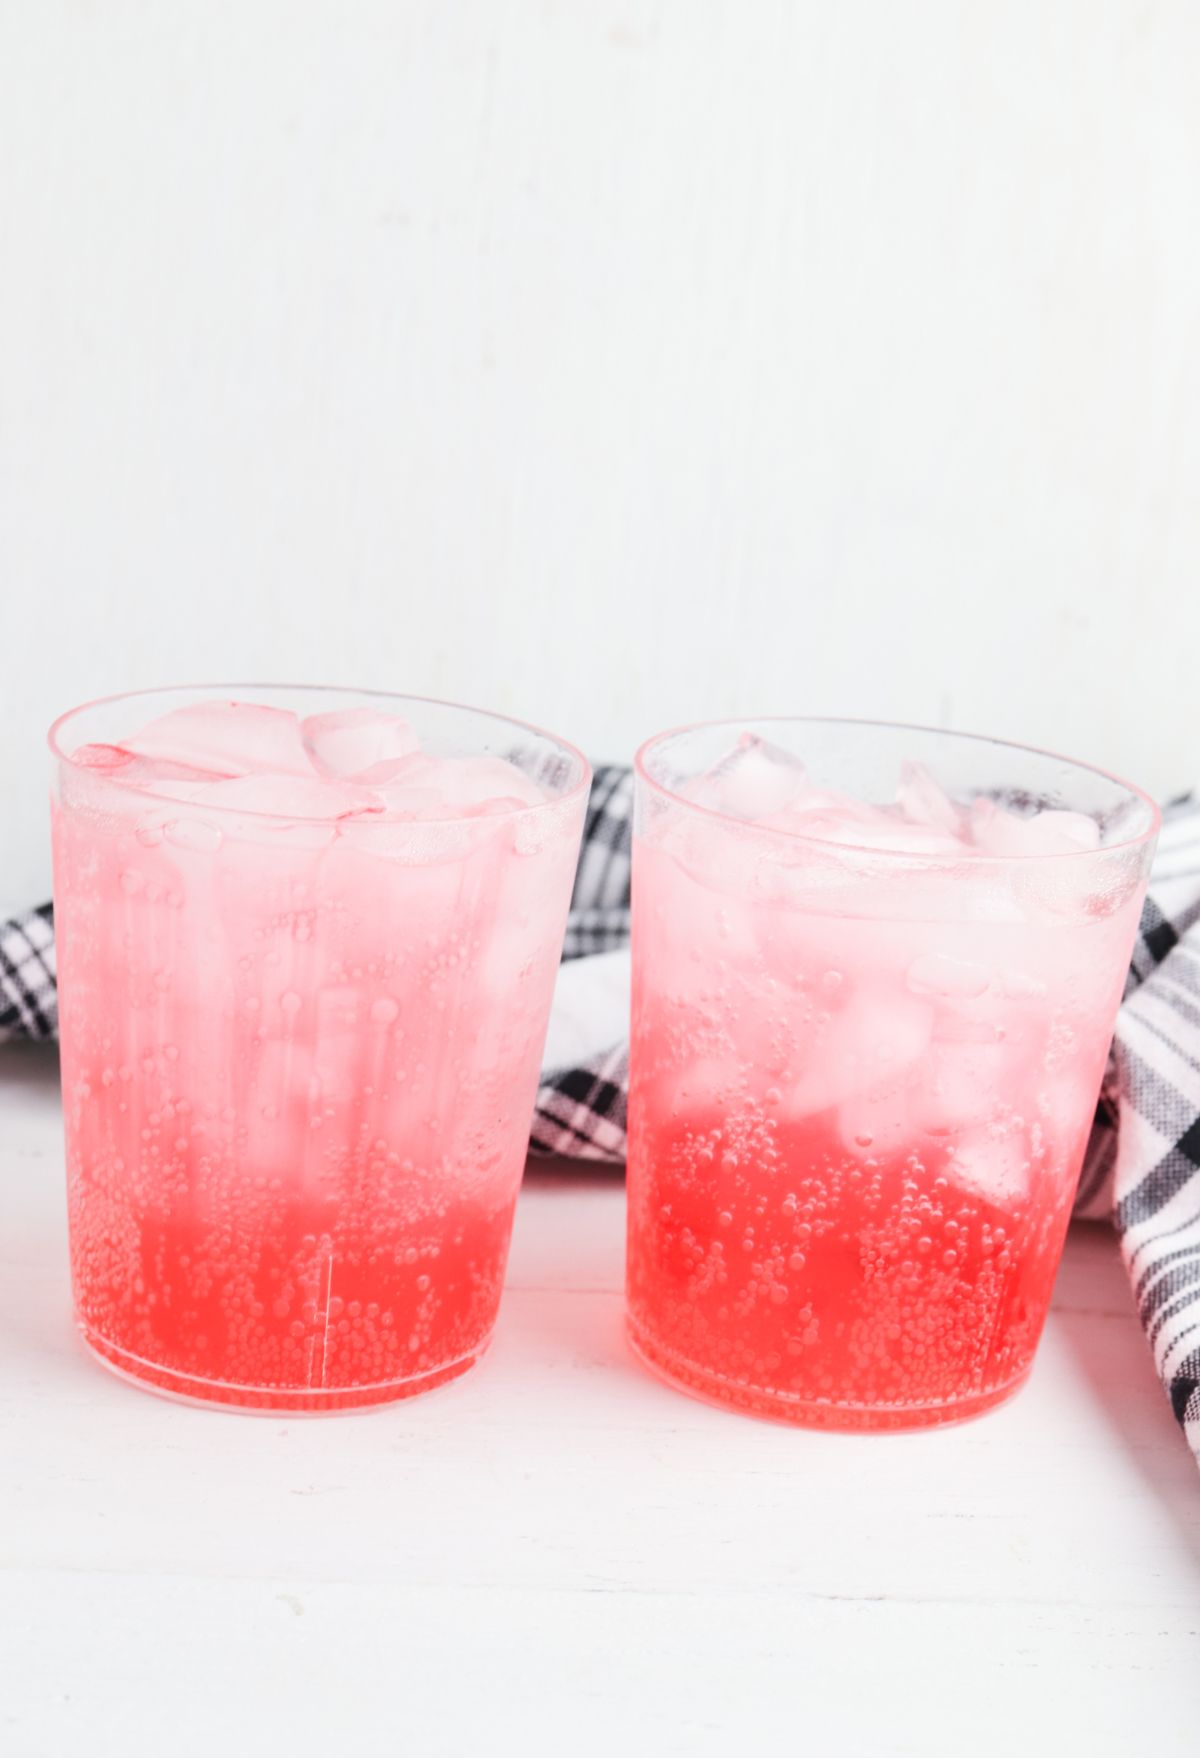 Two glasses of pink iced tea on a wooden table.